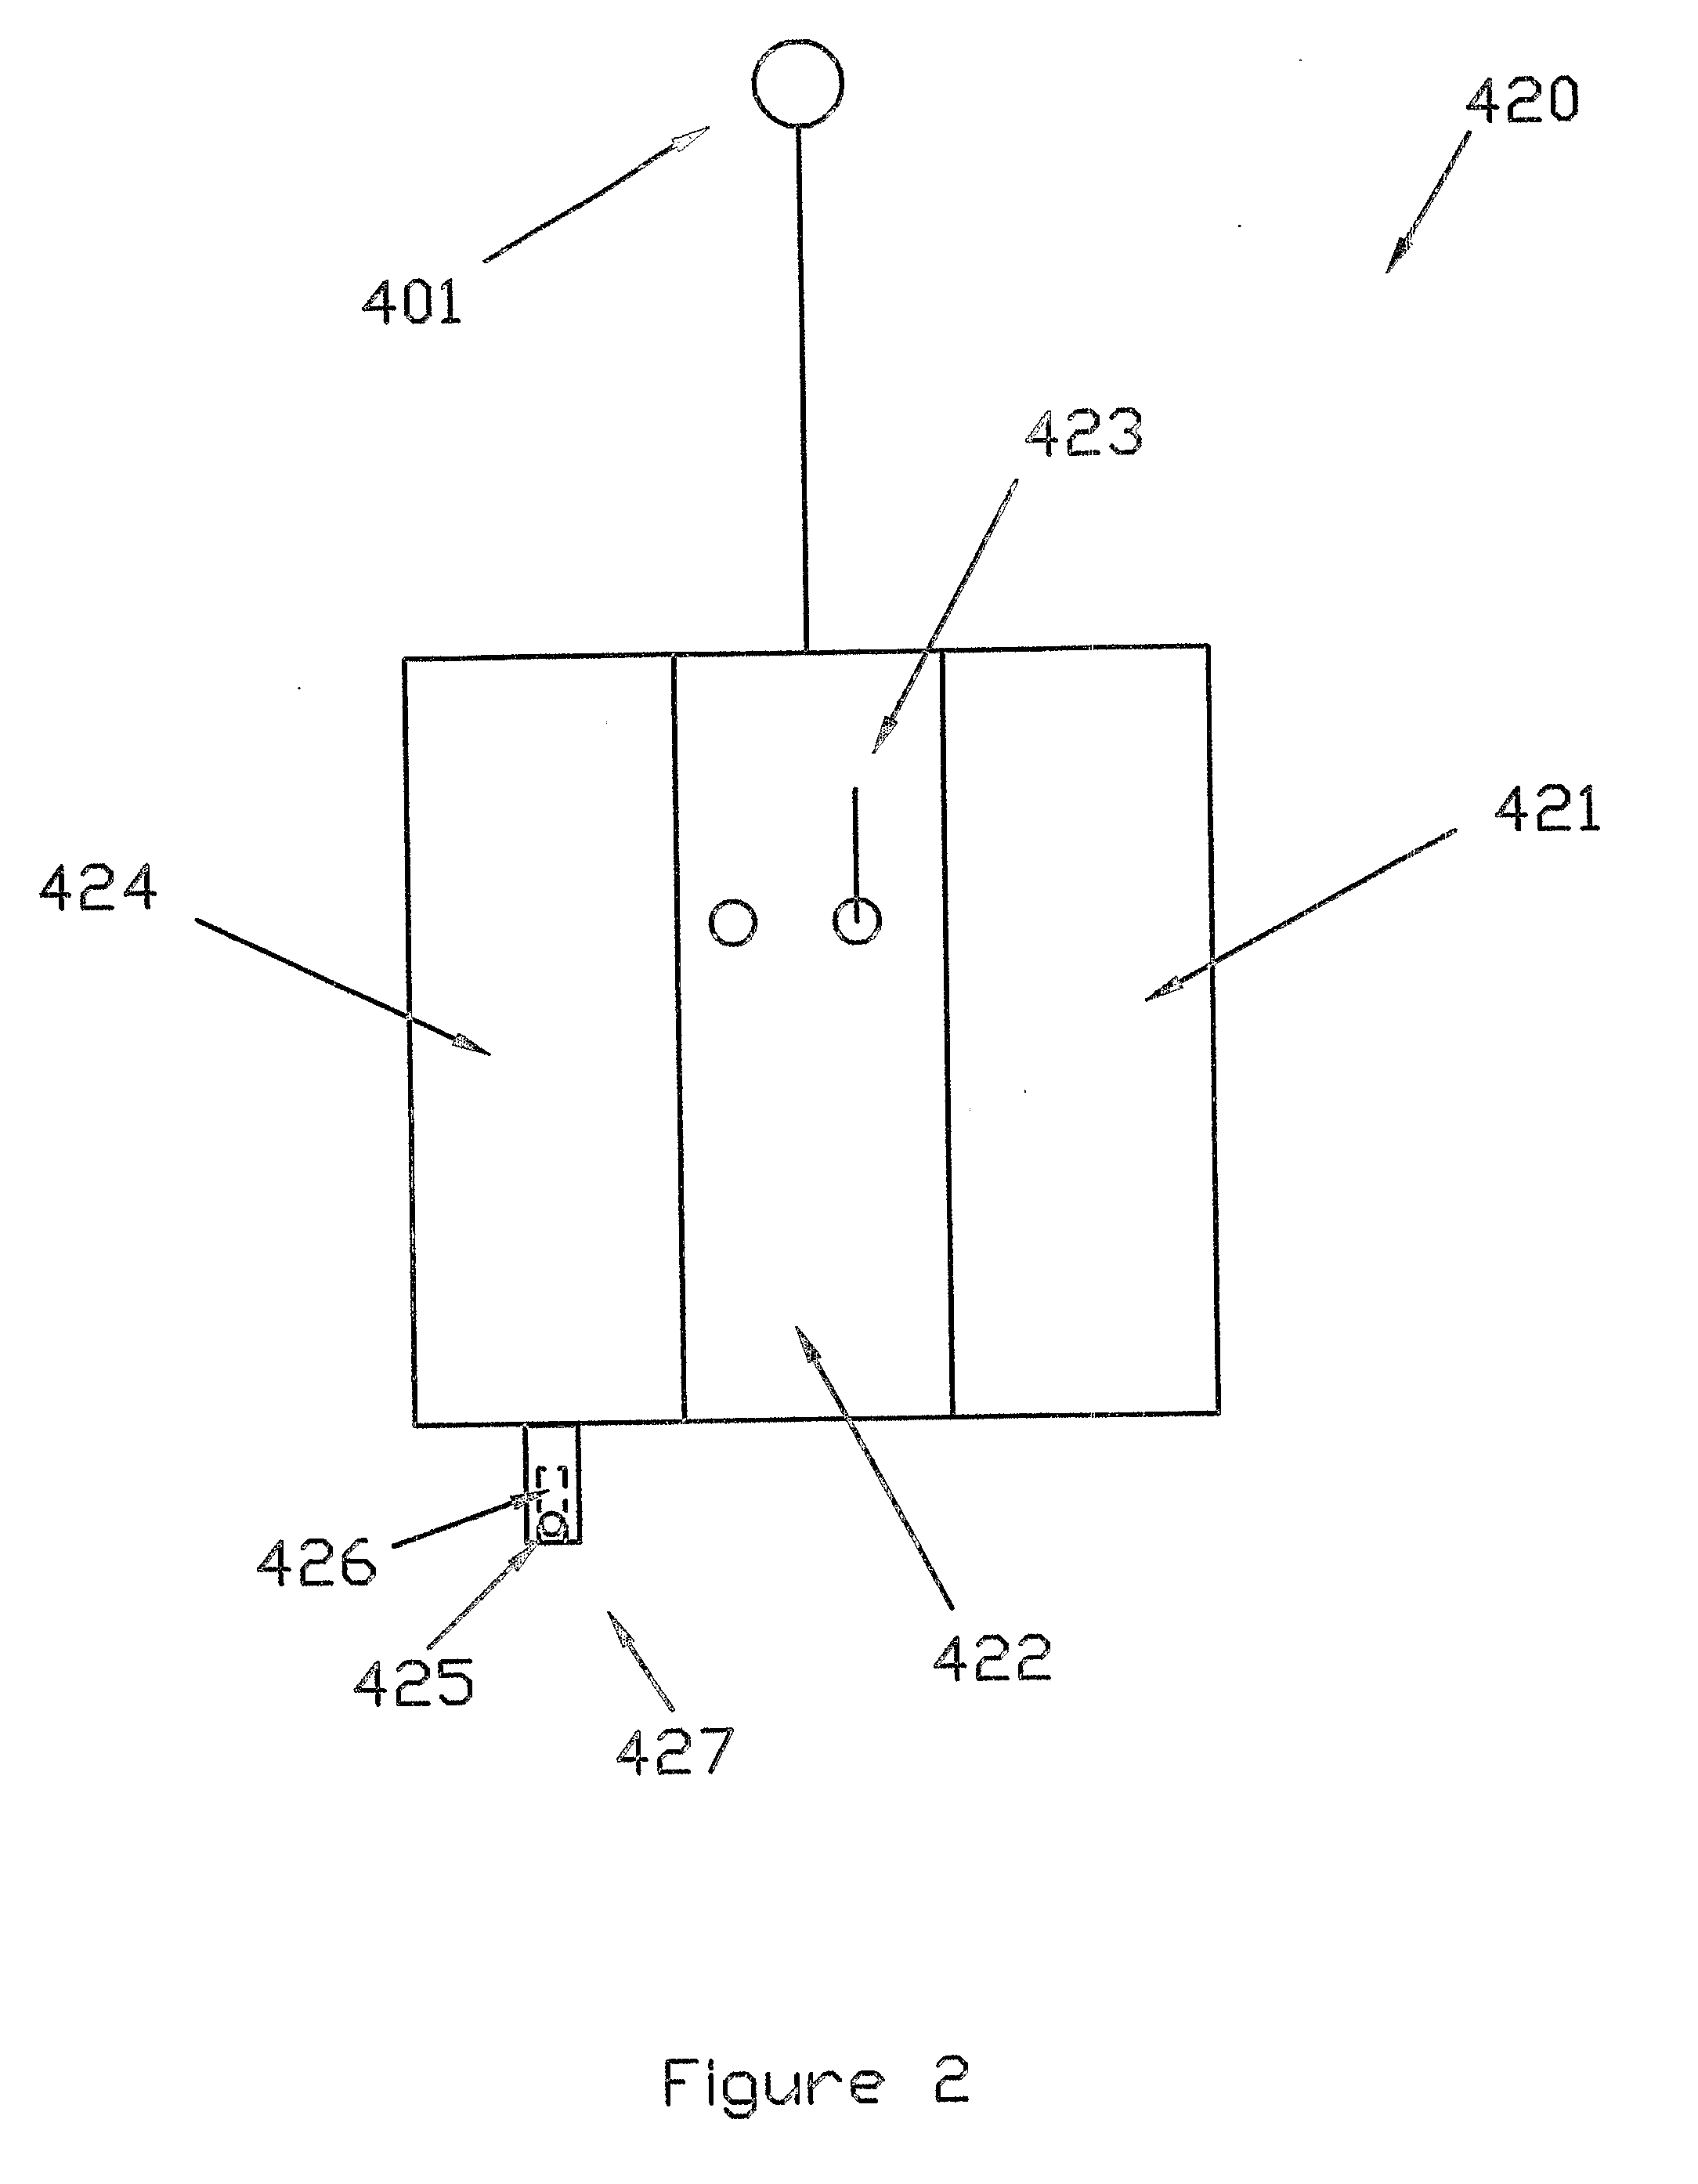 Method and Arrangement for Stopping Powered Equipment in an Emergency Situation